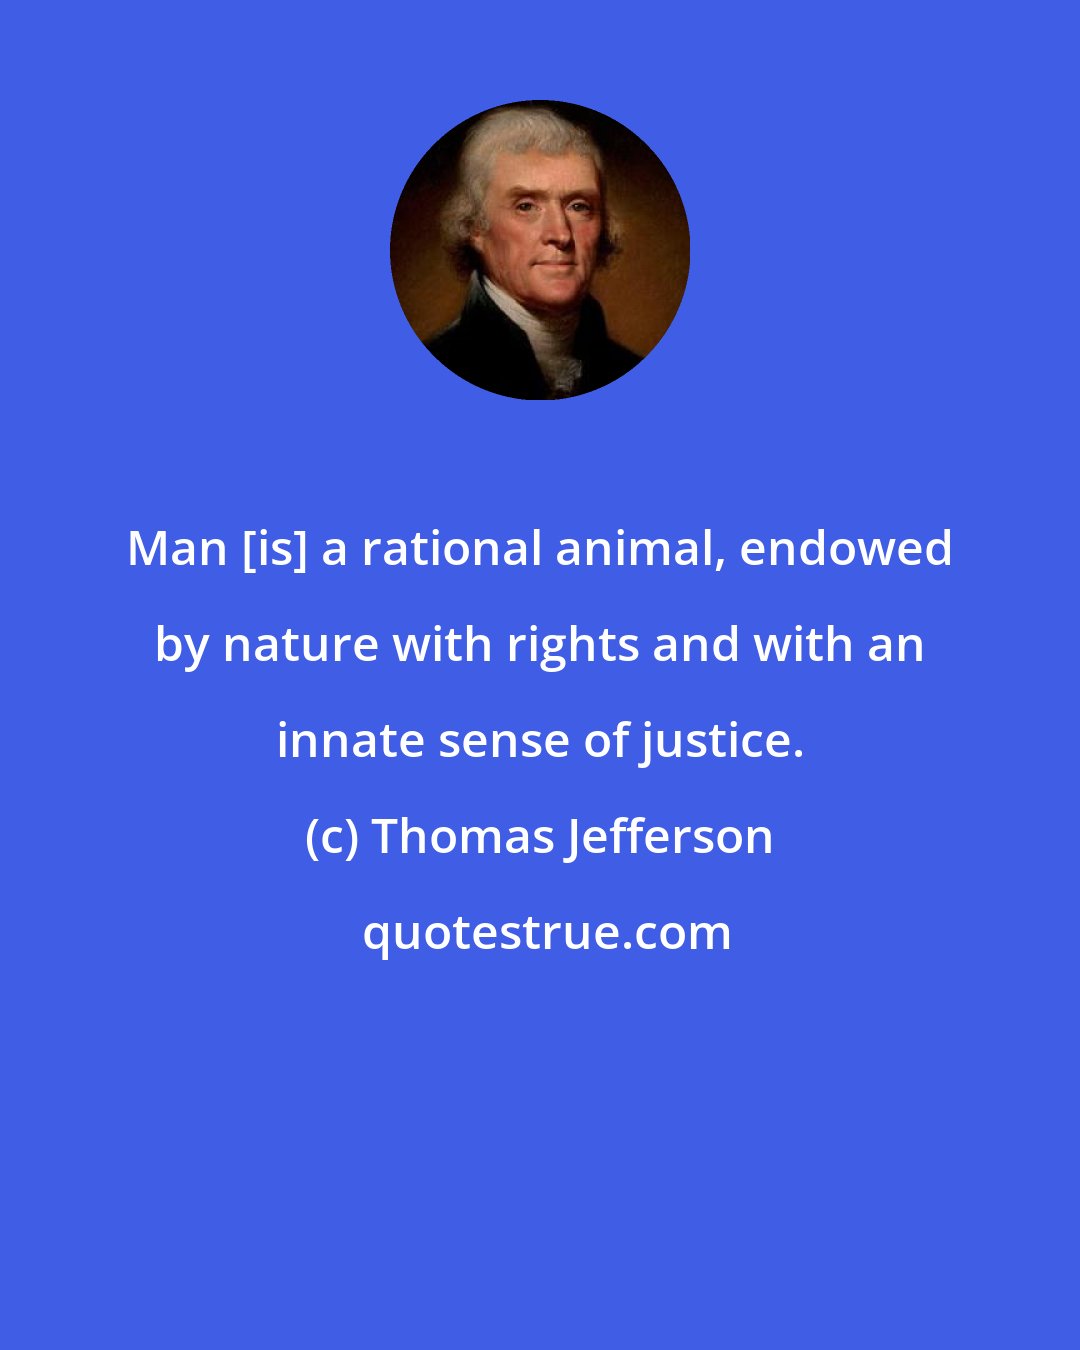 Thomas Jefferson: Man [is] a rational animal, endowed by nature with rights and with an innate sense of justice.